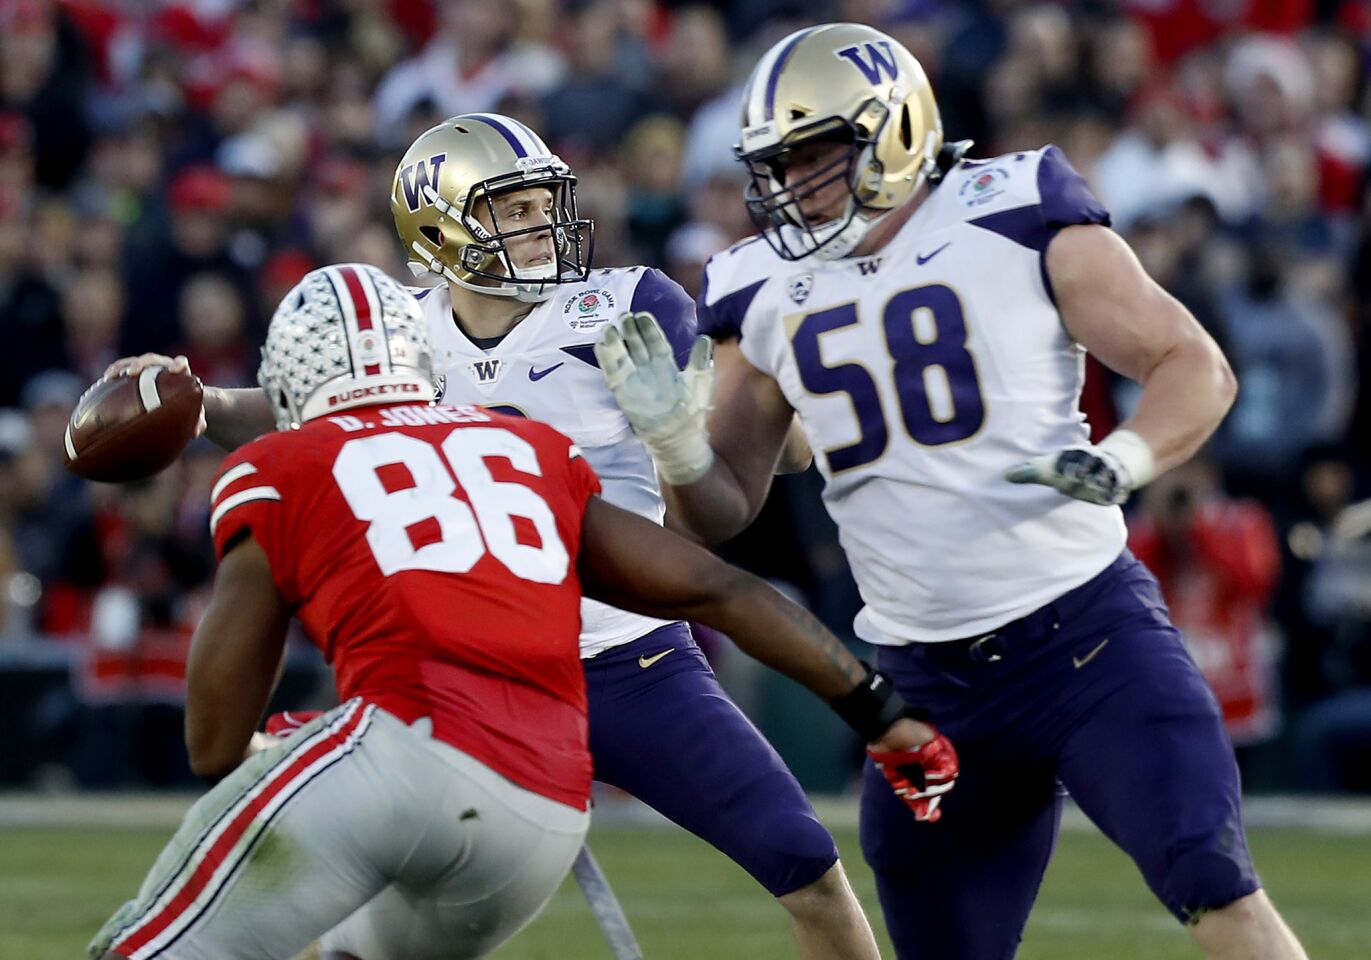 Washington quarterback Jake Browning gets pressured by Ohio State defensive tackle Dre'Mont Jones in the third quarter of the Rose Bowl on Jan. 1.